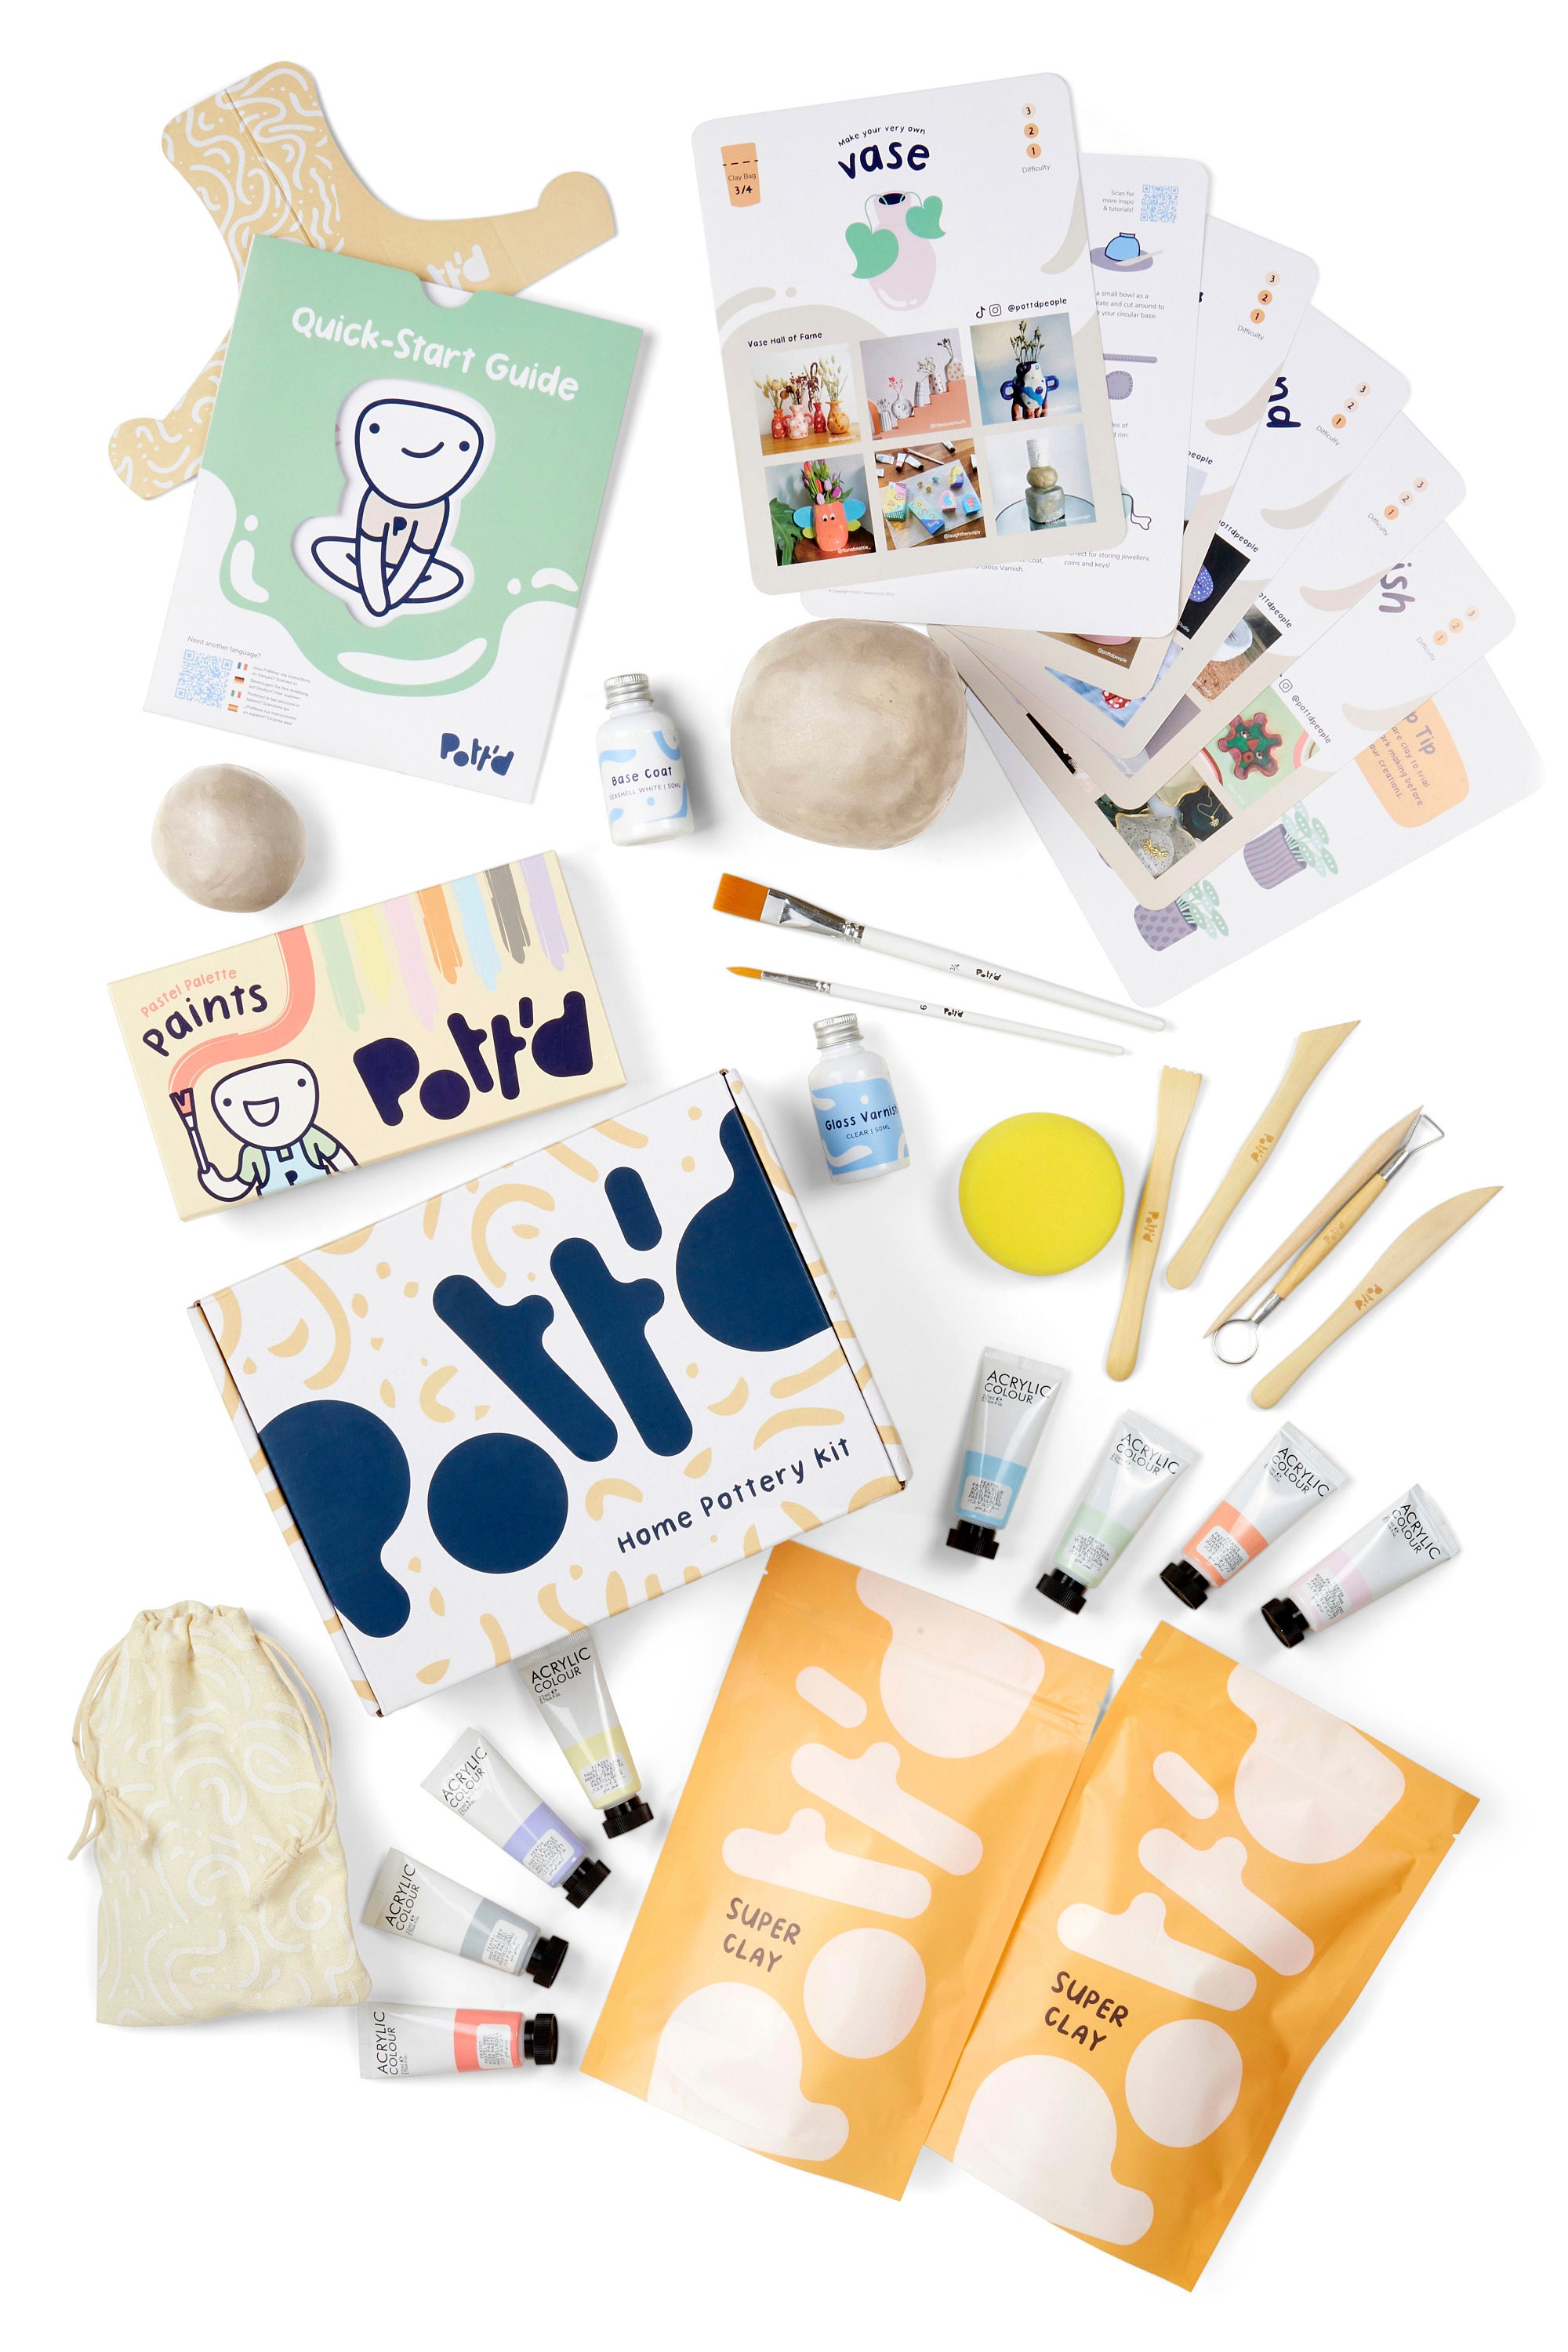 Pott'd™ Home Air-dry Clay Pottery Kit for Adults & Beginners Kit